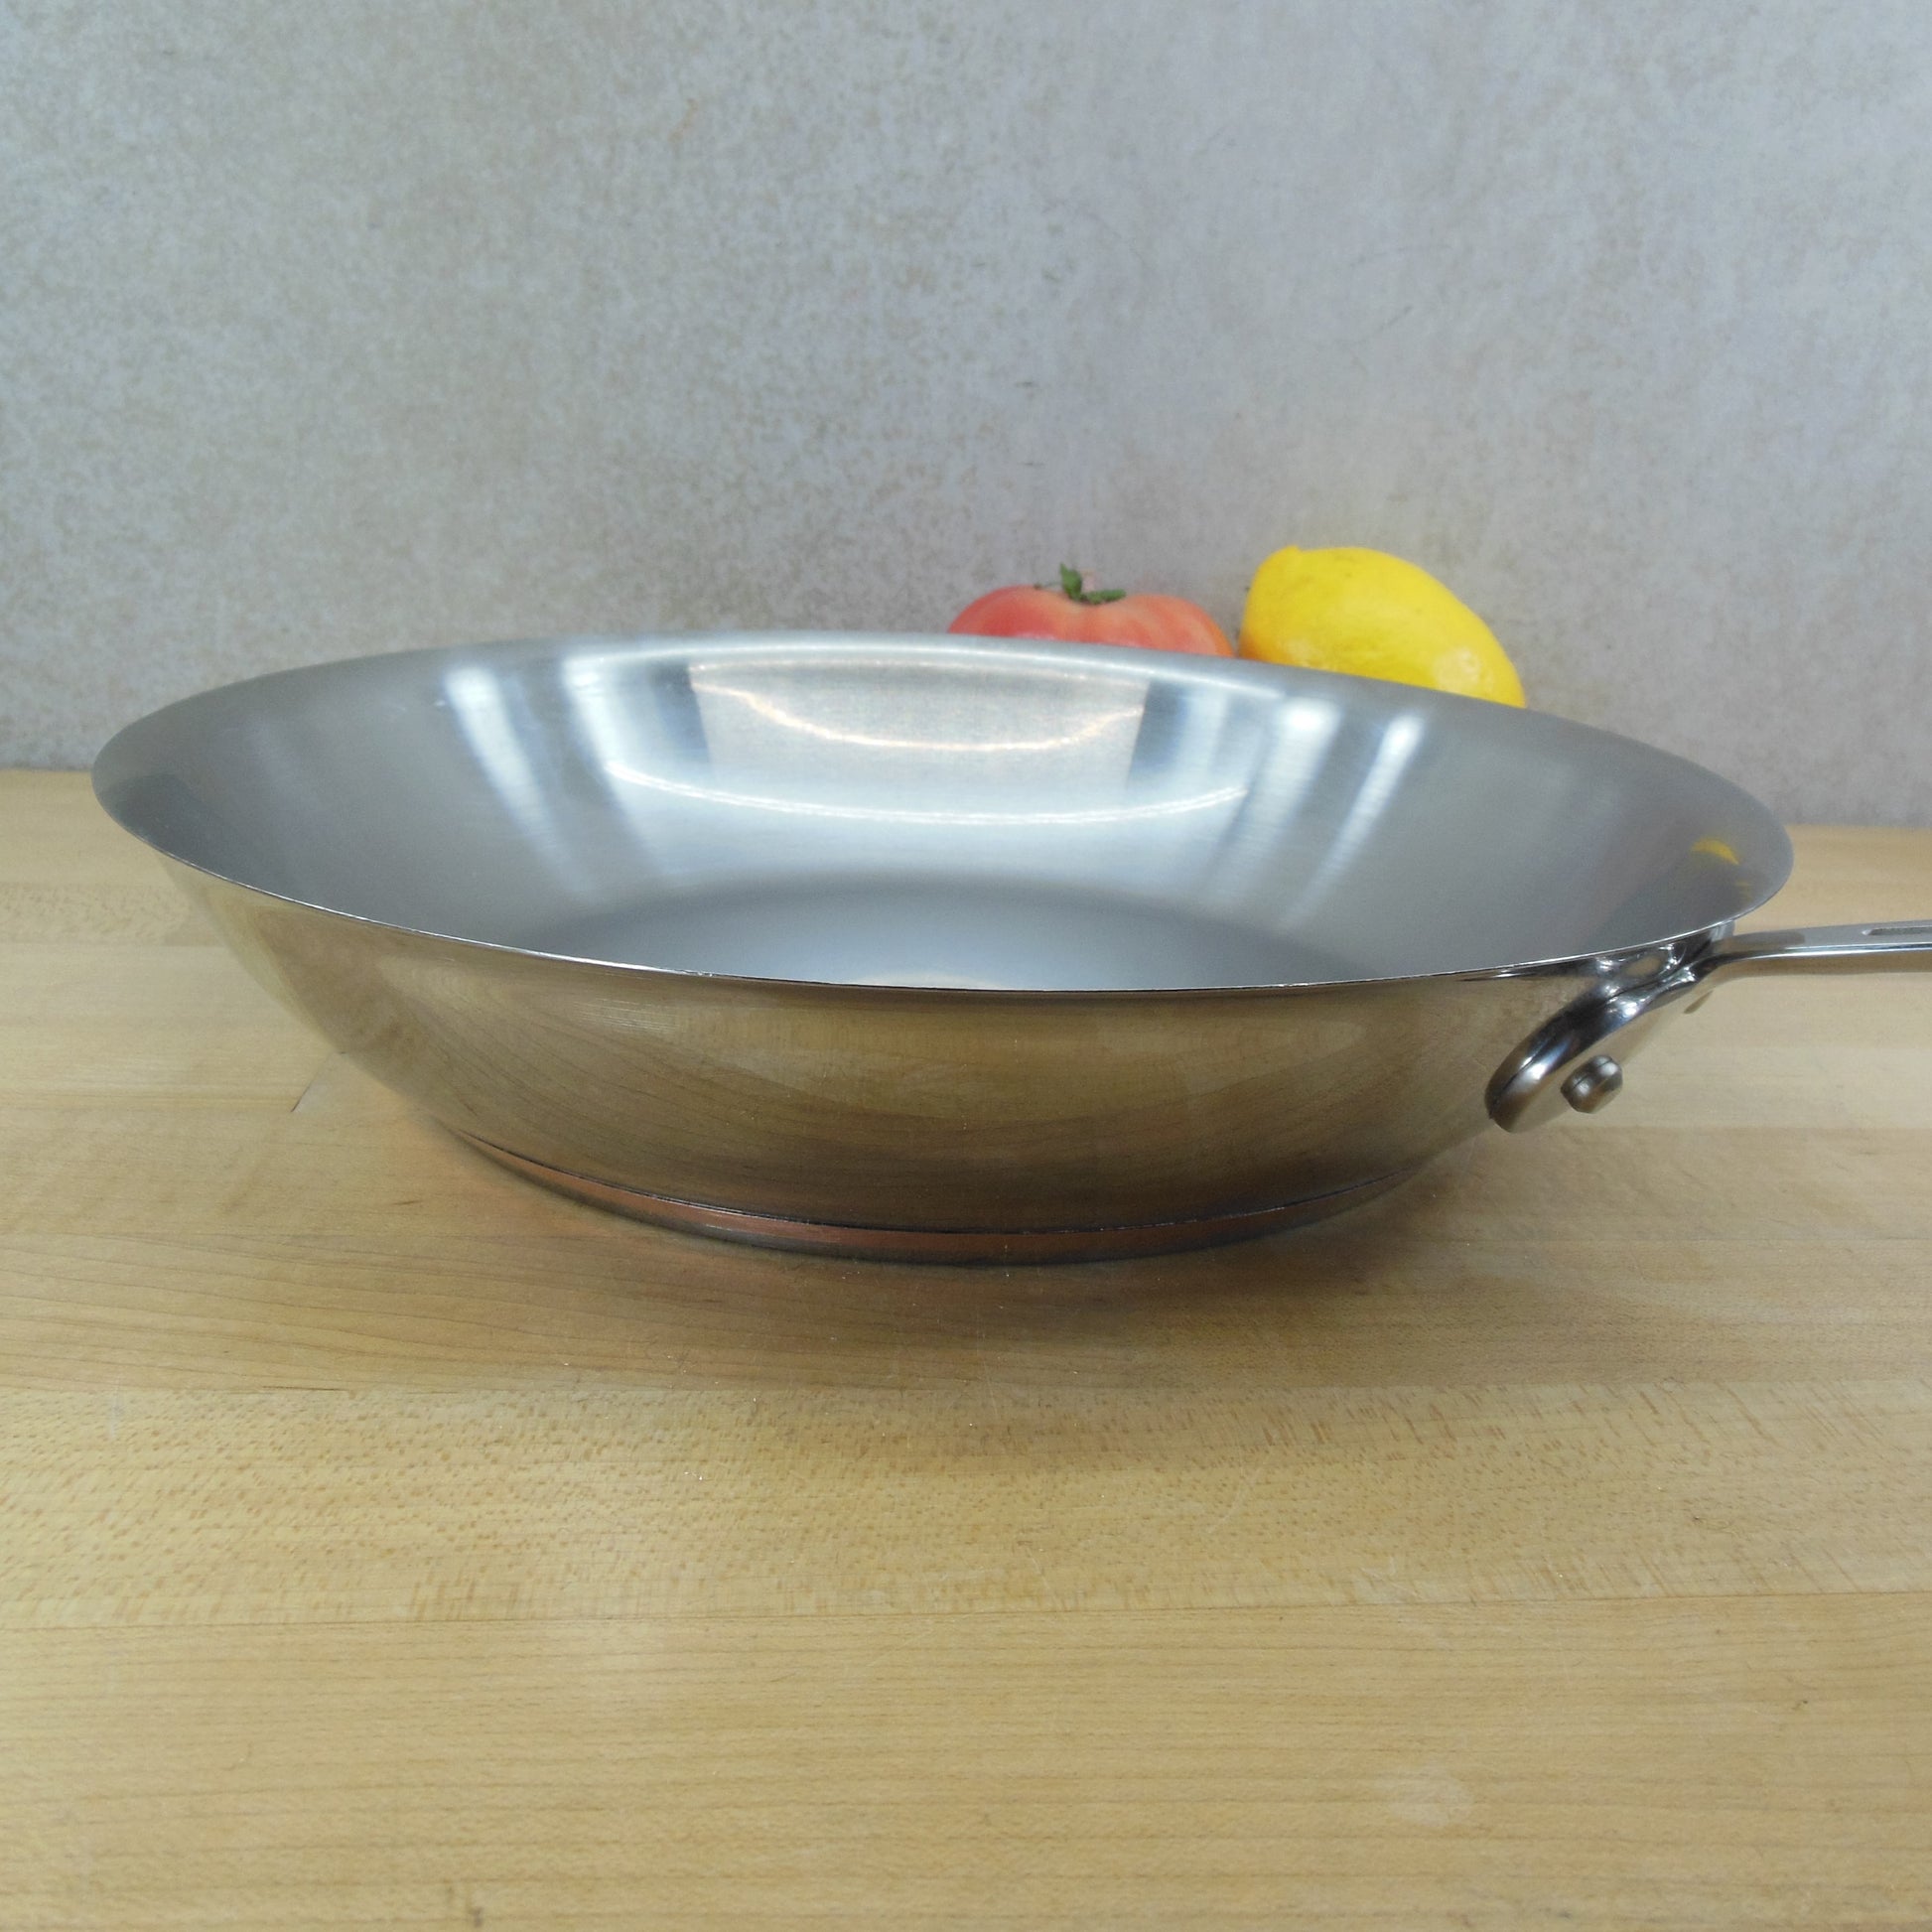 Emeril All-Clad 8 inch Stainless Steel Copper Core Frying Saute Pan Skillet